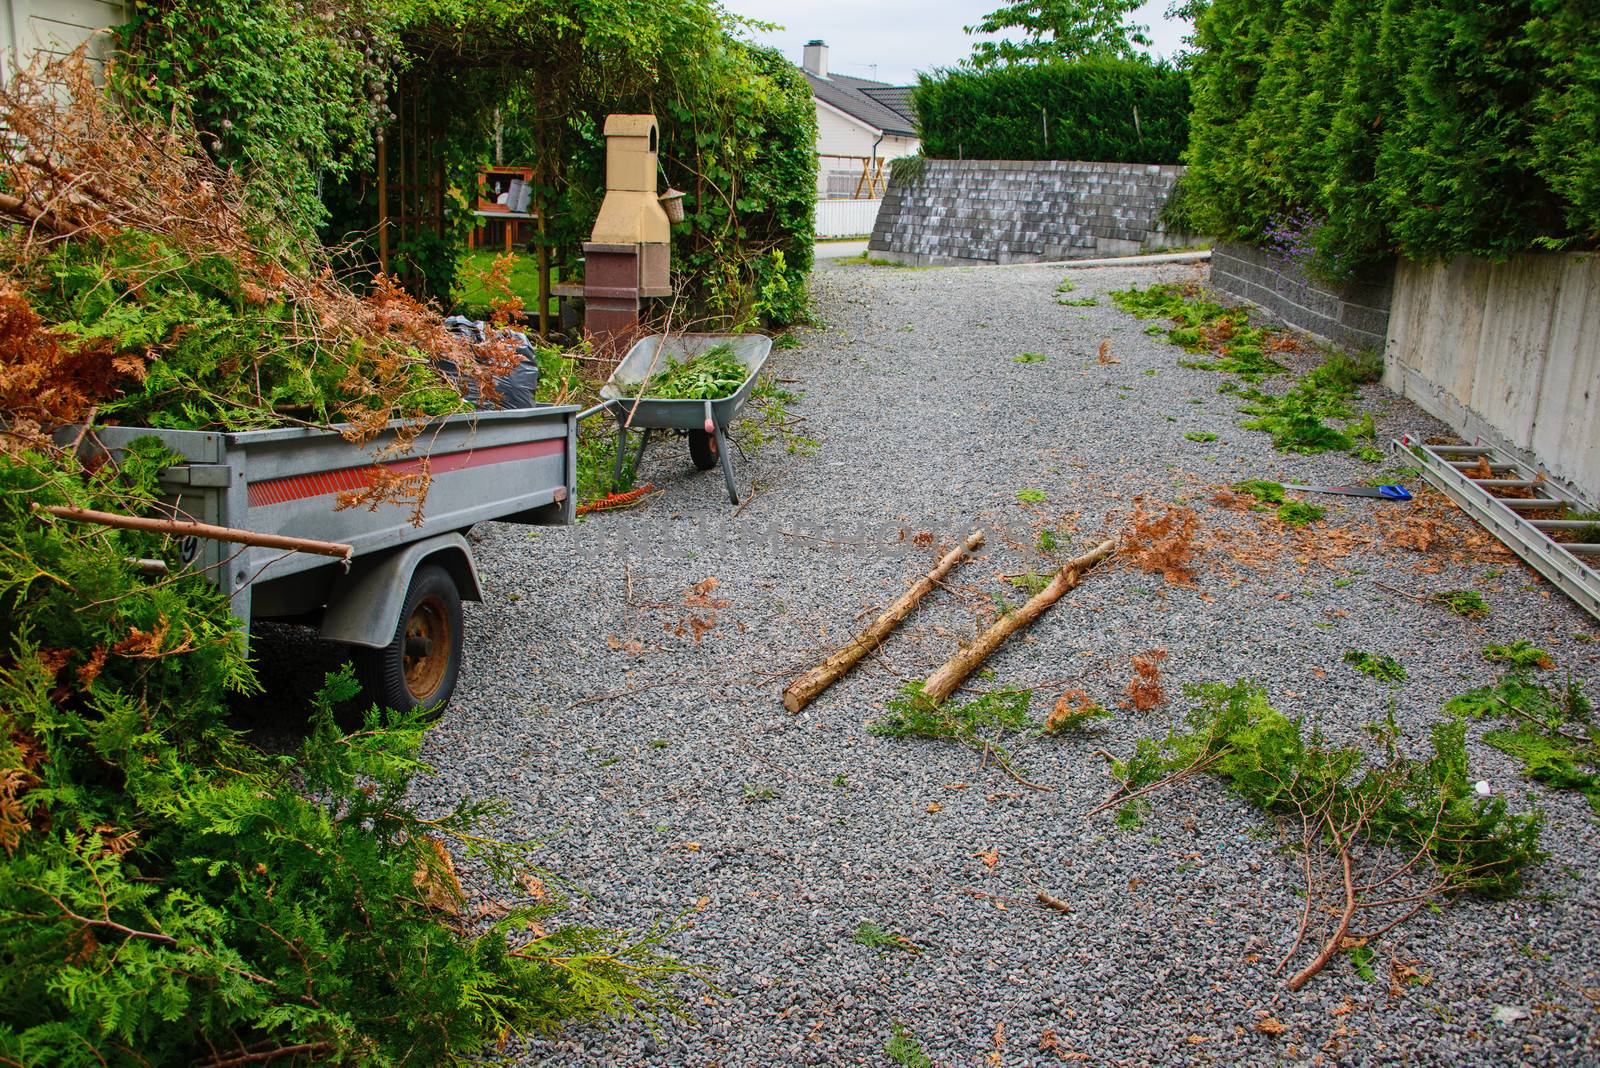 Garden "make-over" and cutting down trees